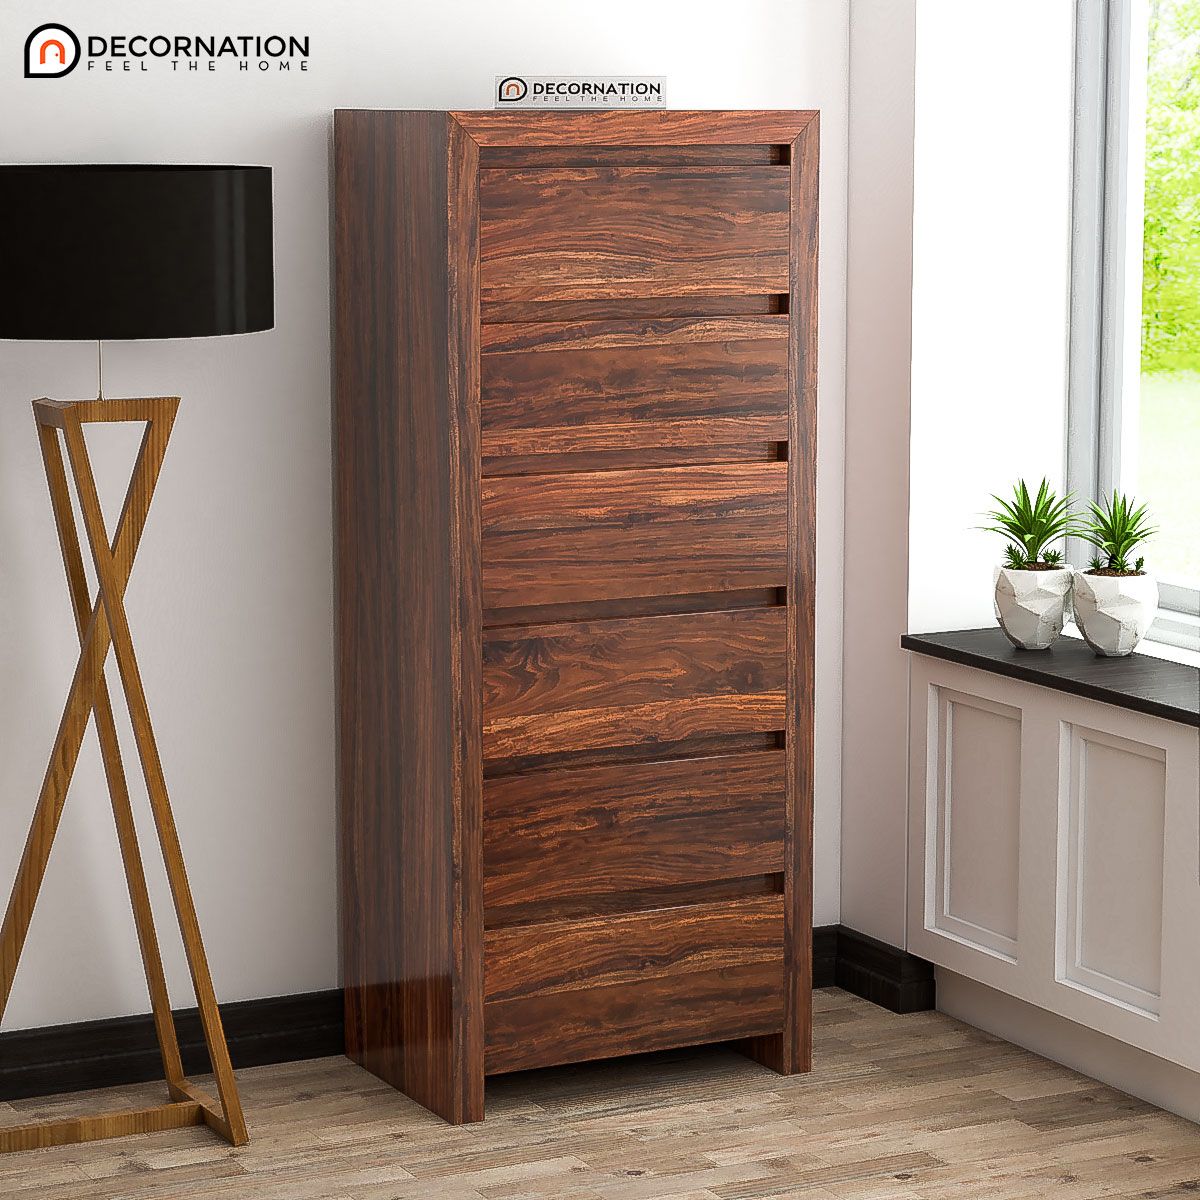 Adara Wooden Storage Cabinet – Natural Finish – Decornation With Regard To Wood Cabinet With Drawers (View 6 of 15)